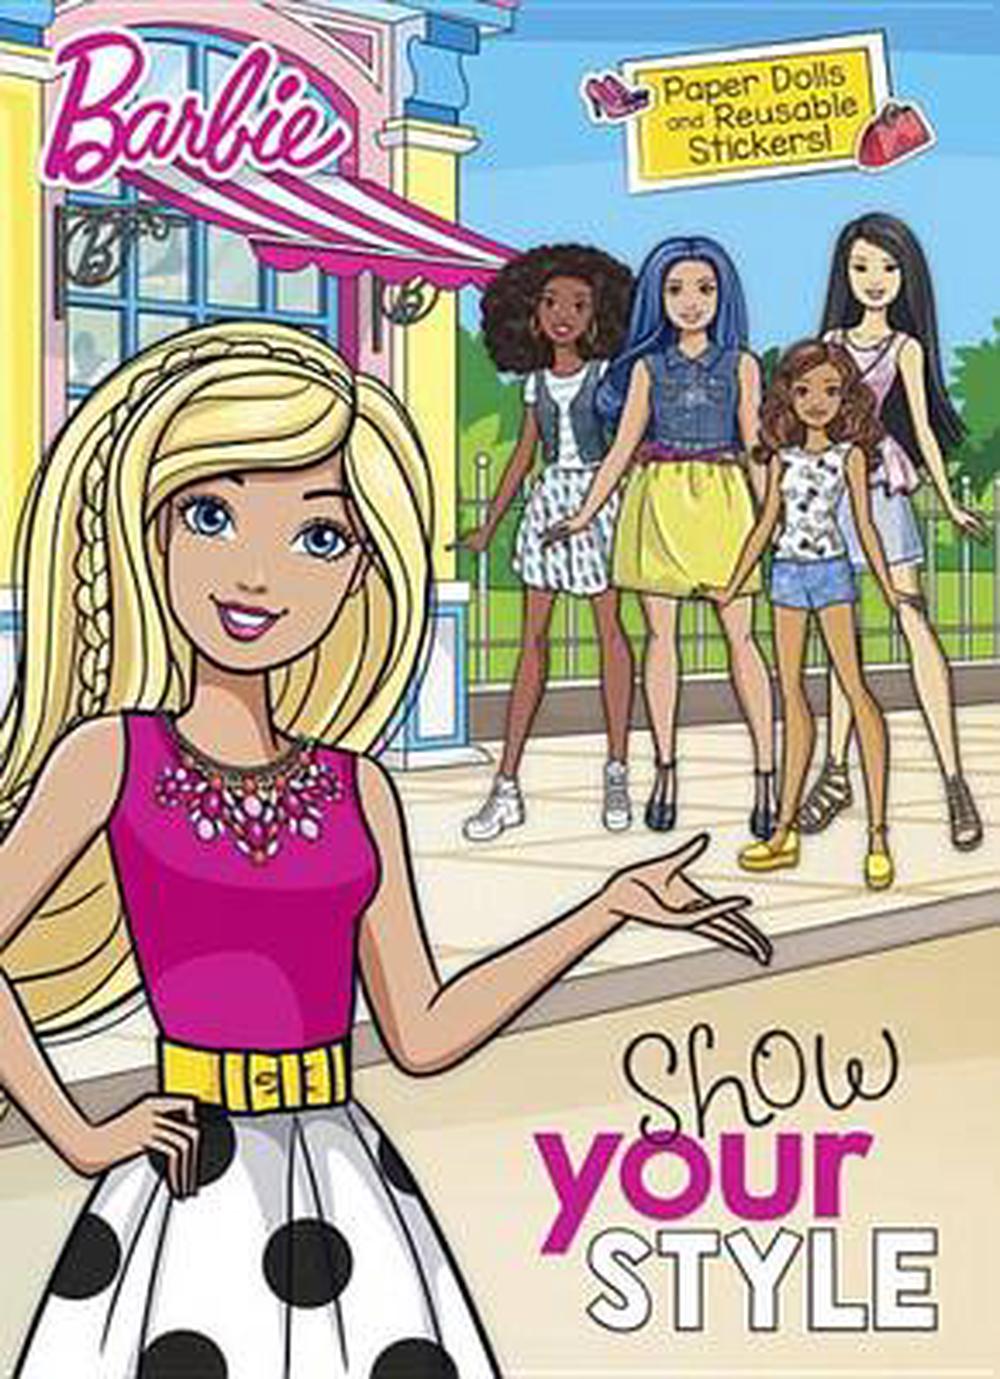 Show Your Style (Barbie) by Golden Books (English) Paperback Book Free